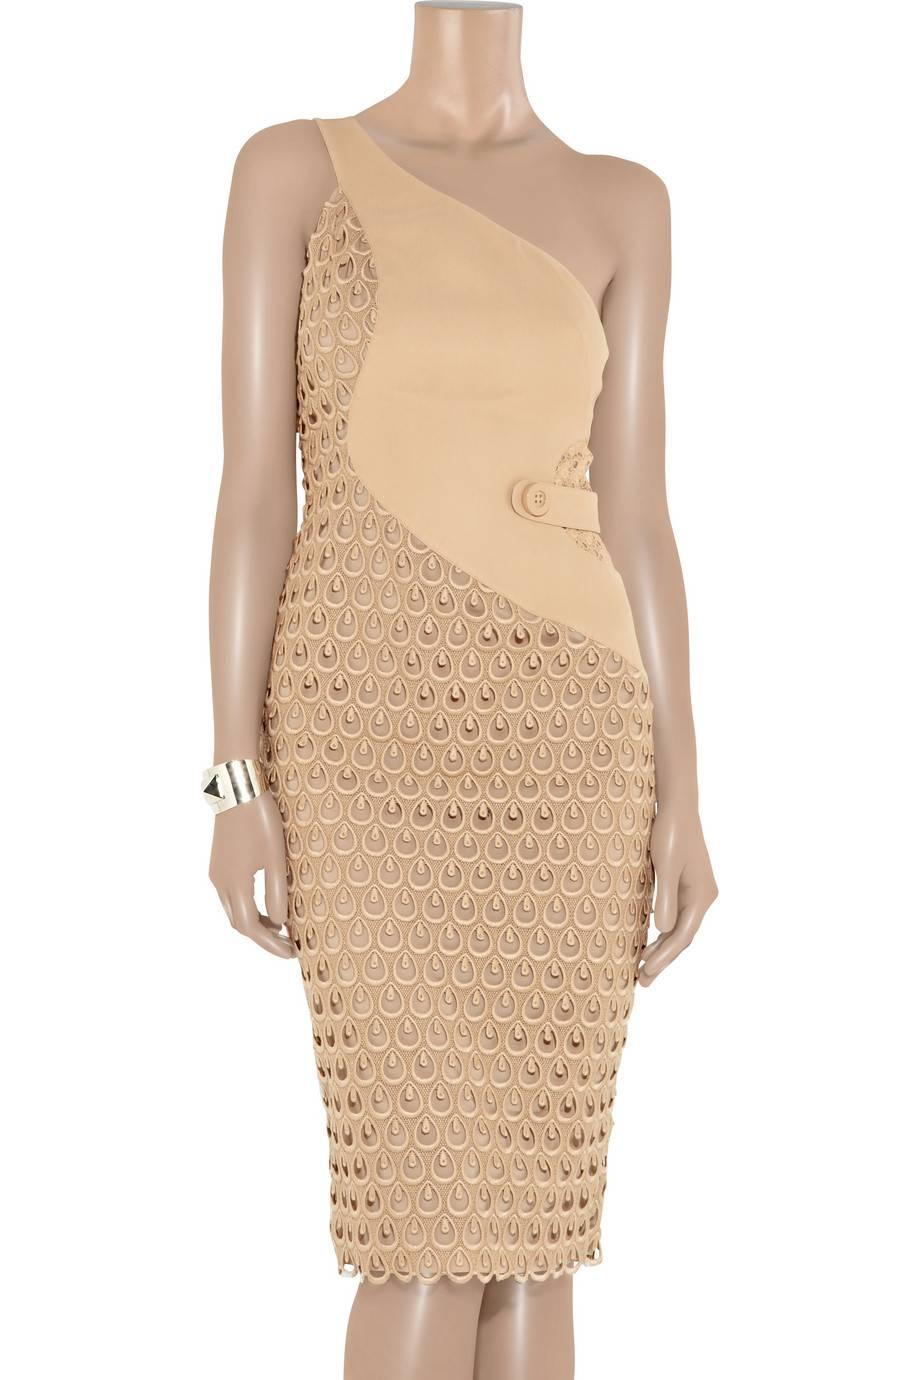 GORGEOUS VERSACE SILK & LACE INSERT DRESS

WORN BY TOPMODELS AND ACTRESSES

KEYPIECE BY VERSACE FEATURED IN THE AD CAMPAIGN, THE RUNWAY SHOW AND IN MANY MAGAZINE EDITORIALS

SOLD OUT IMMEDIATELY

Stunning VERSACE signature dress in nude silk and